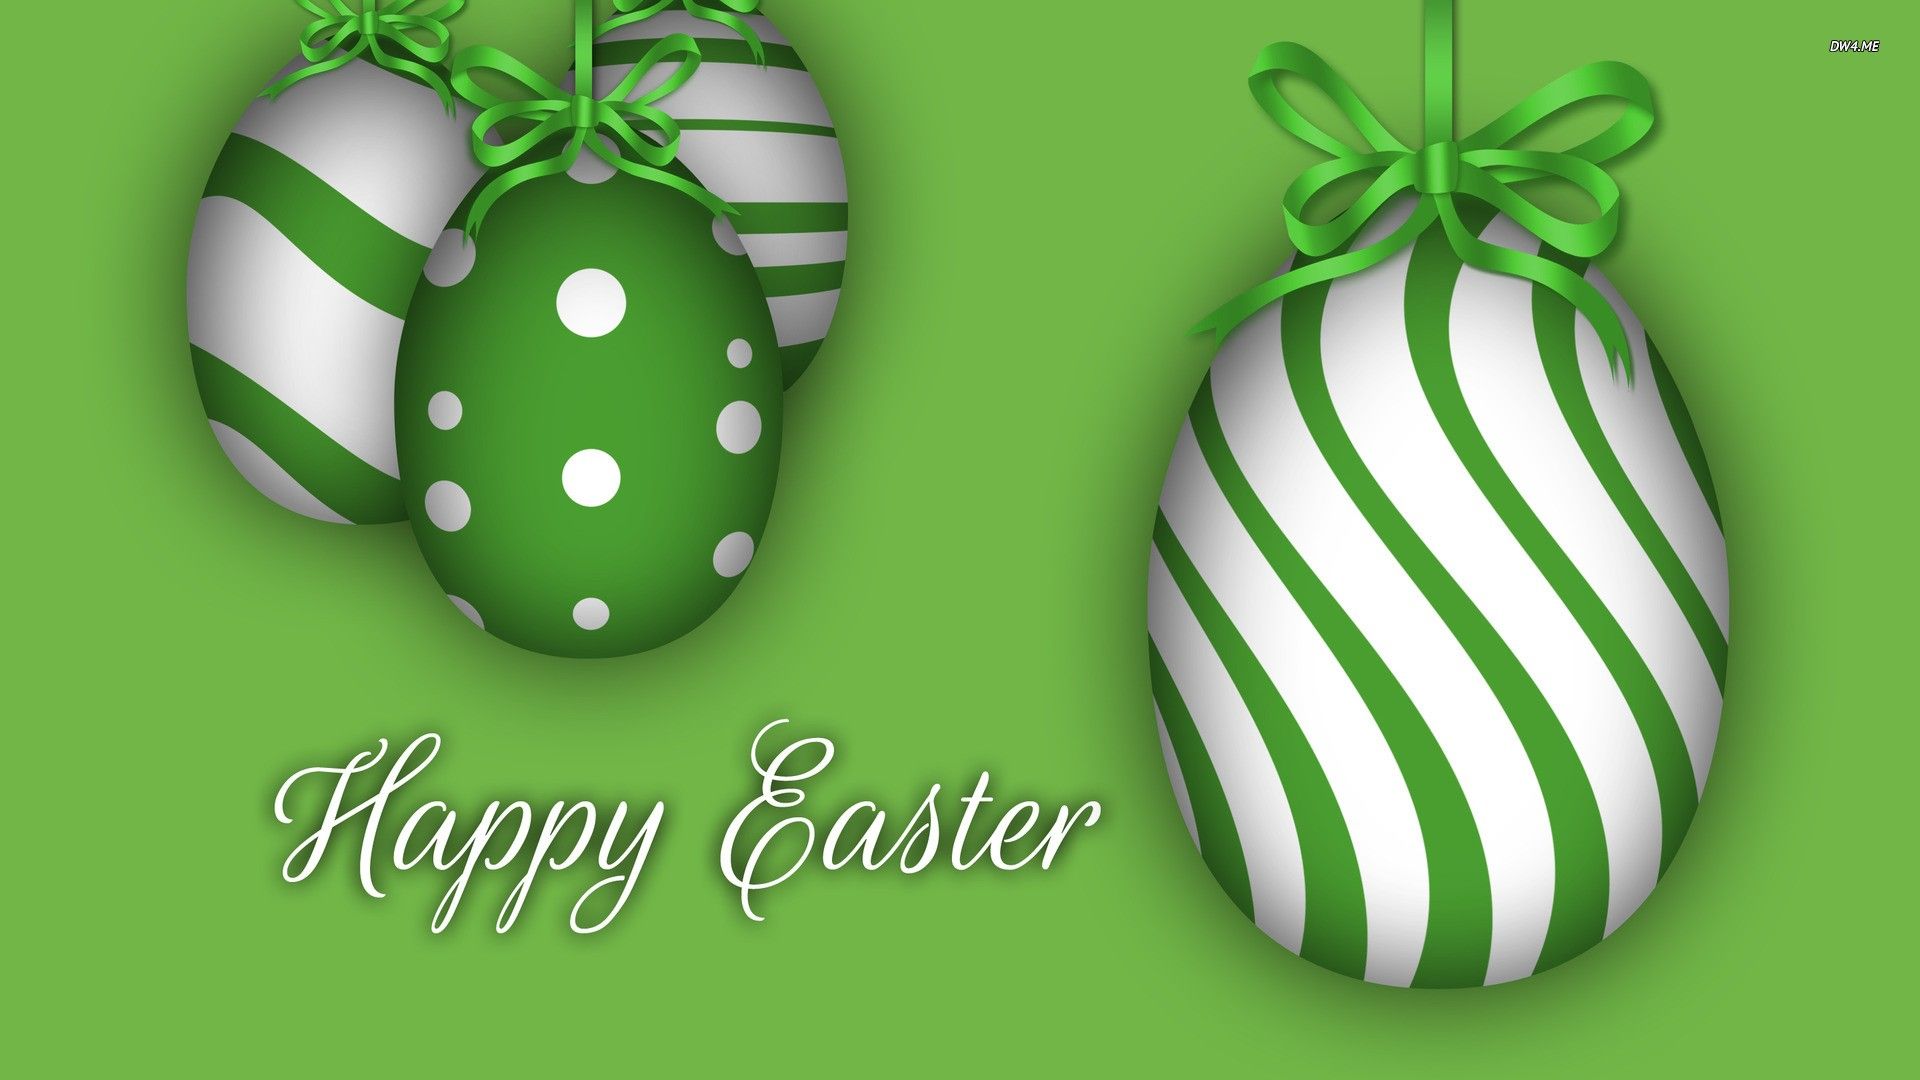 Happy Easter Wallpaper 1 HD Wallpaper Cool Image Easter Green Eggs Wallpaper & Background Download